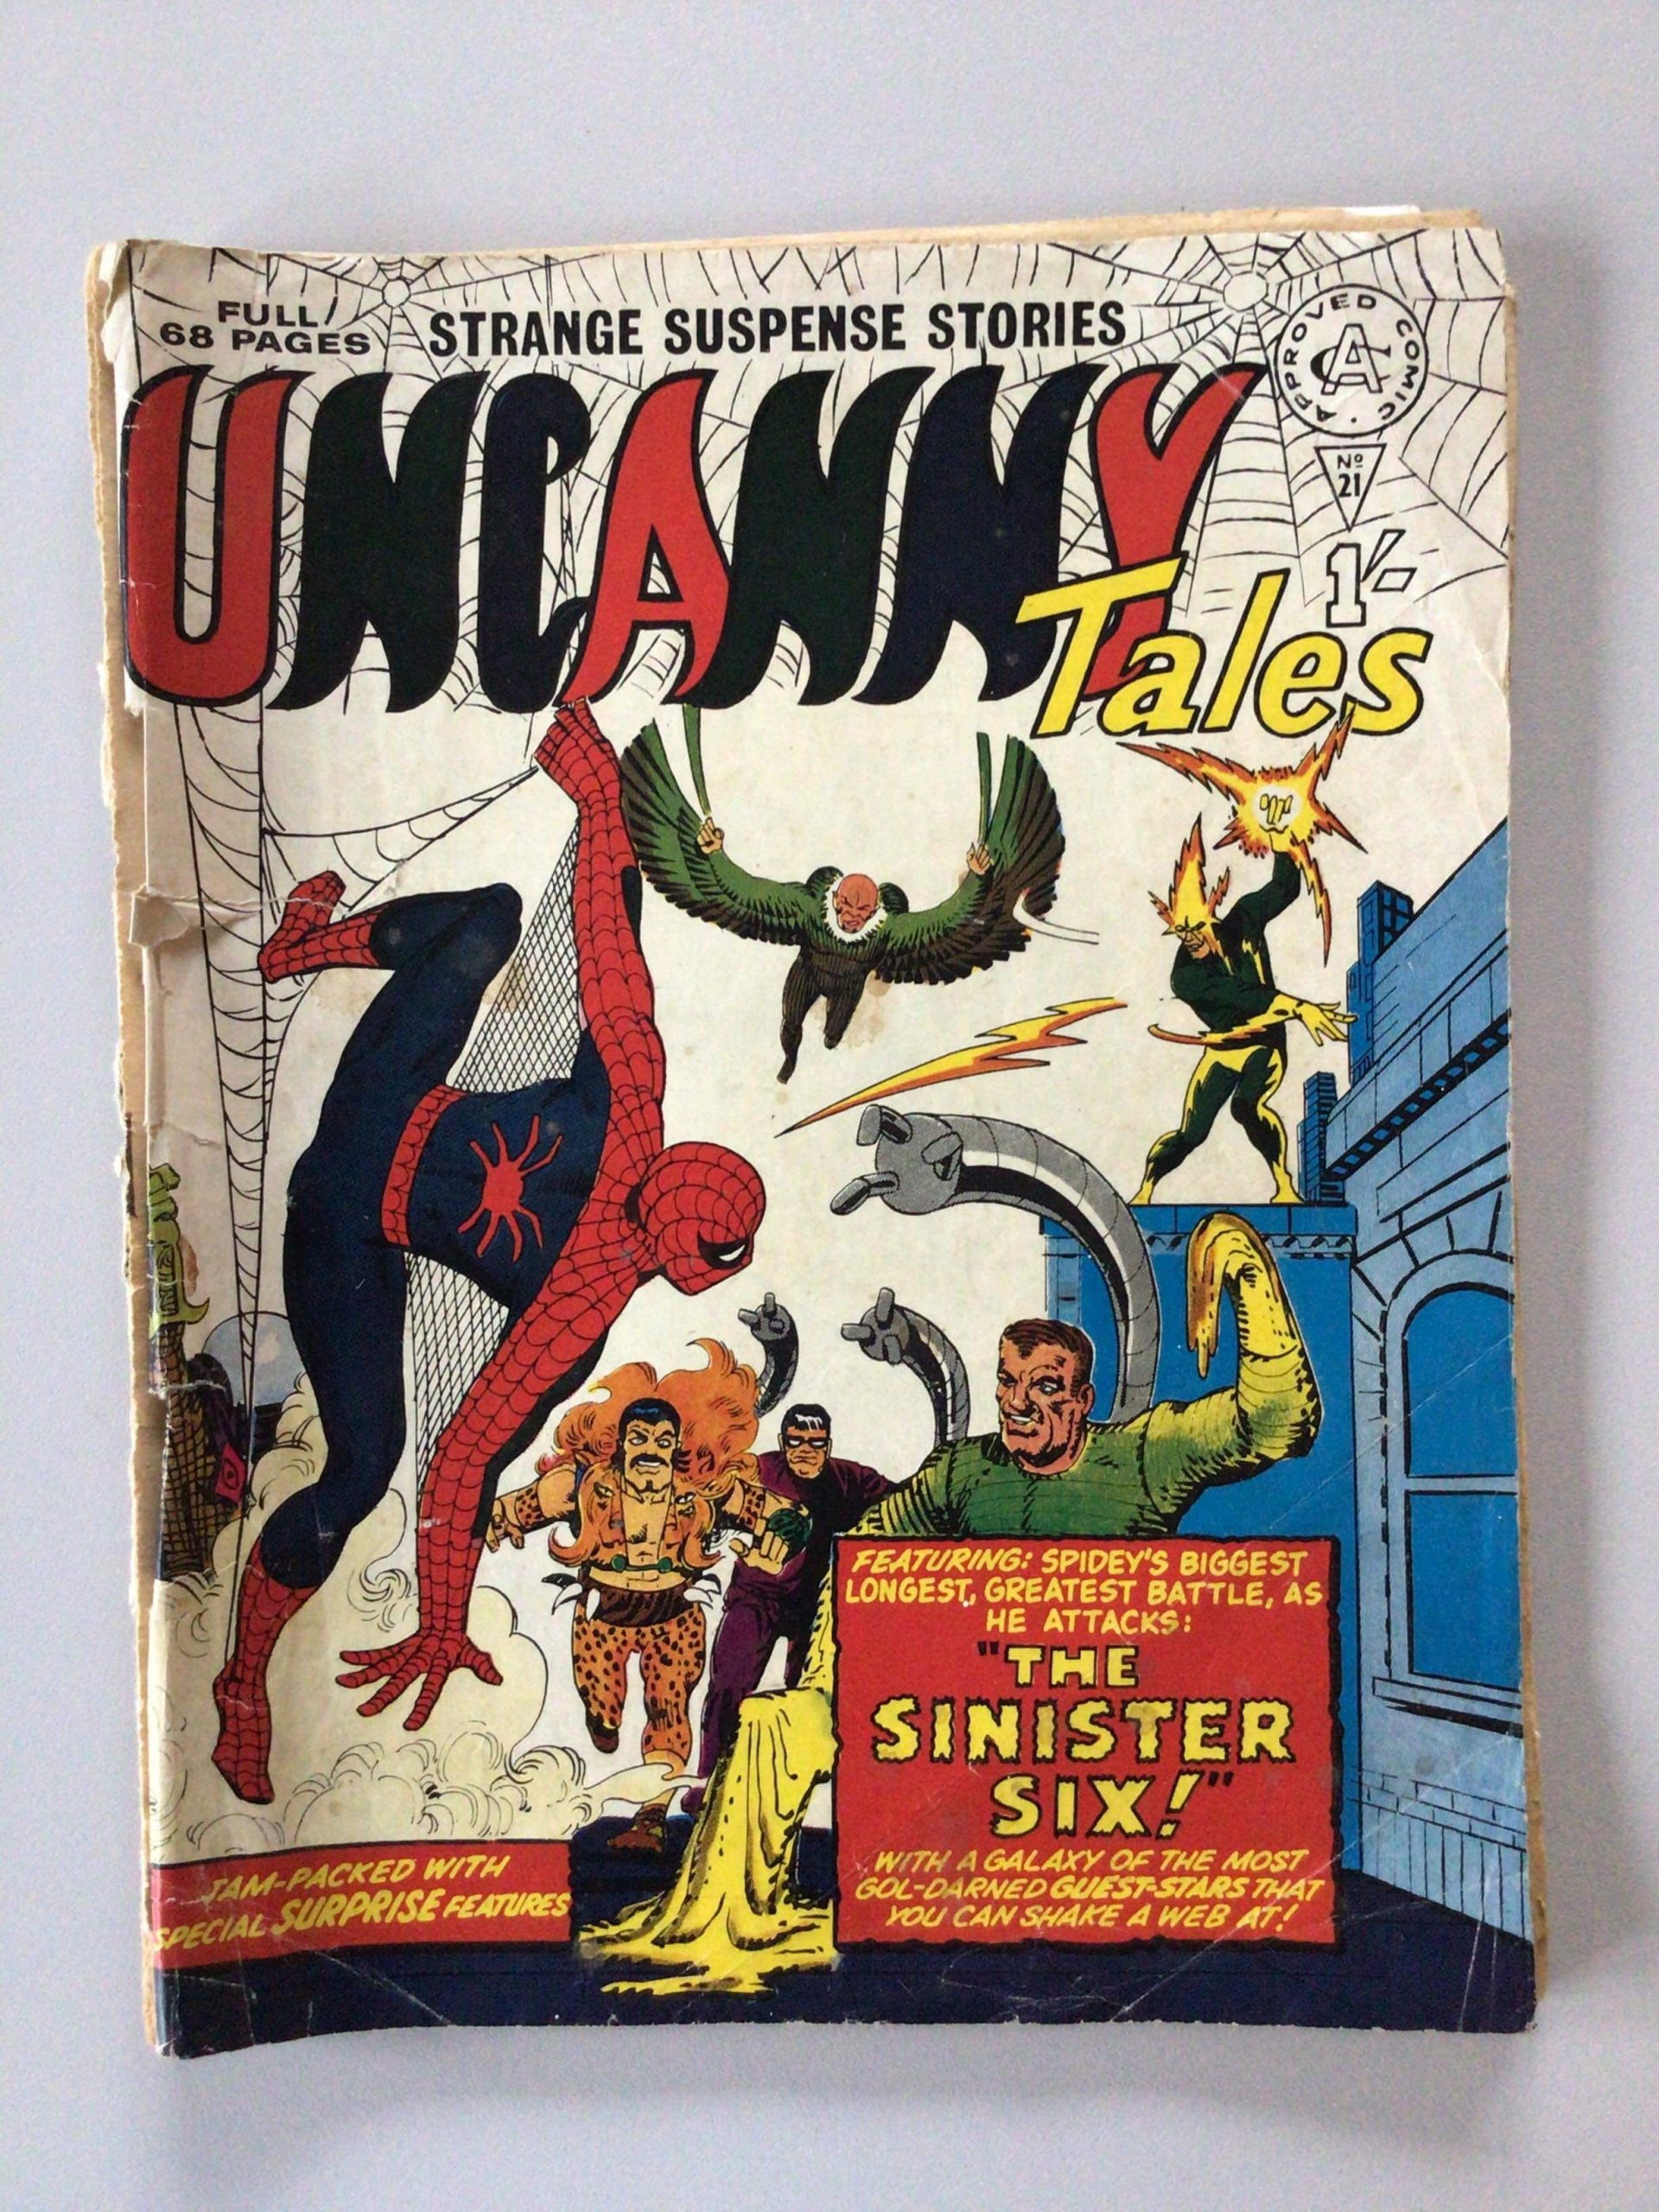 Uncanny Tales #21 featuring an Amazing Spider-Man Annual cover, published in the UK by Alan Class in the 1960s